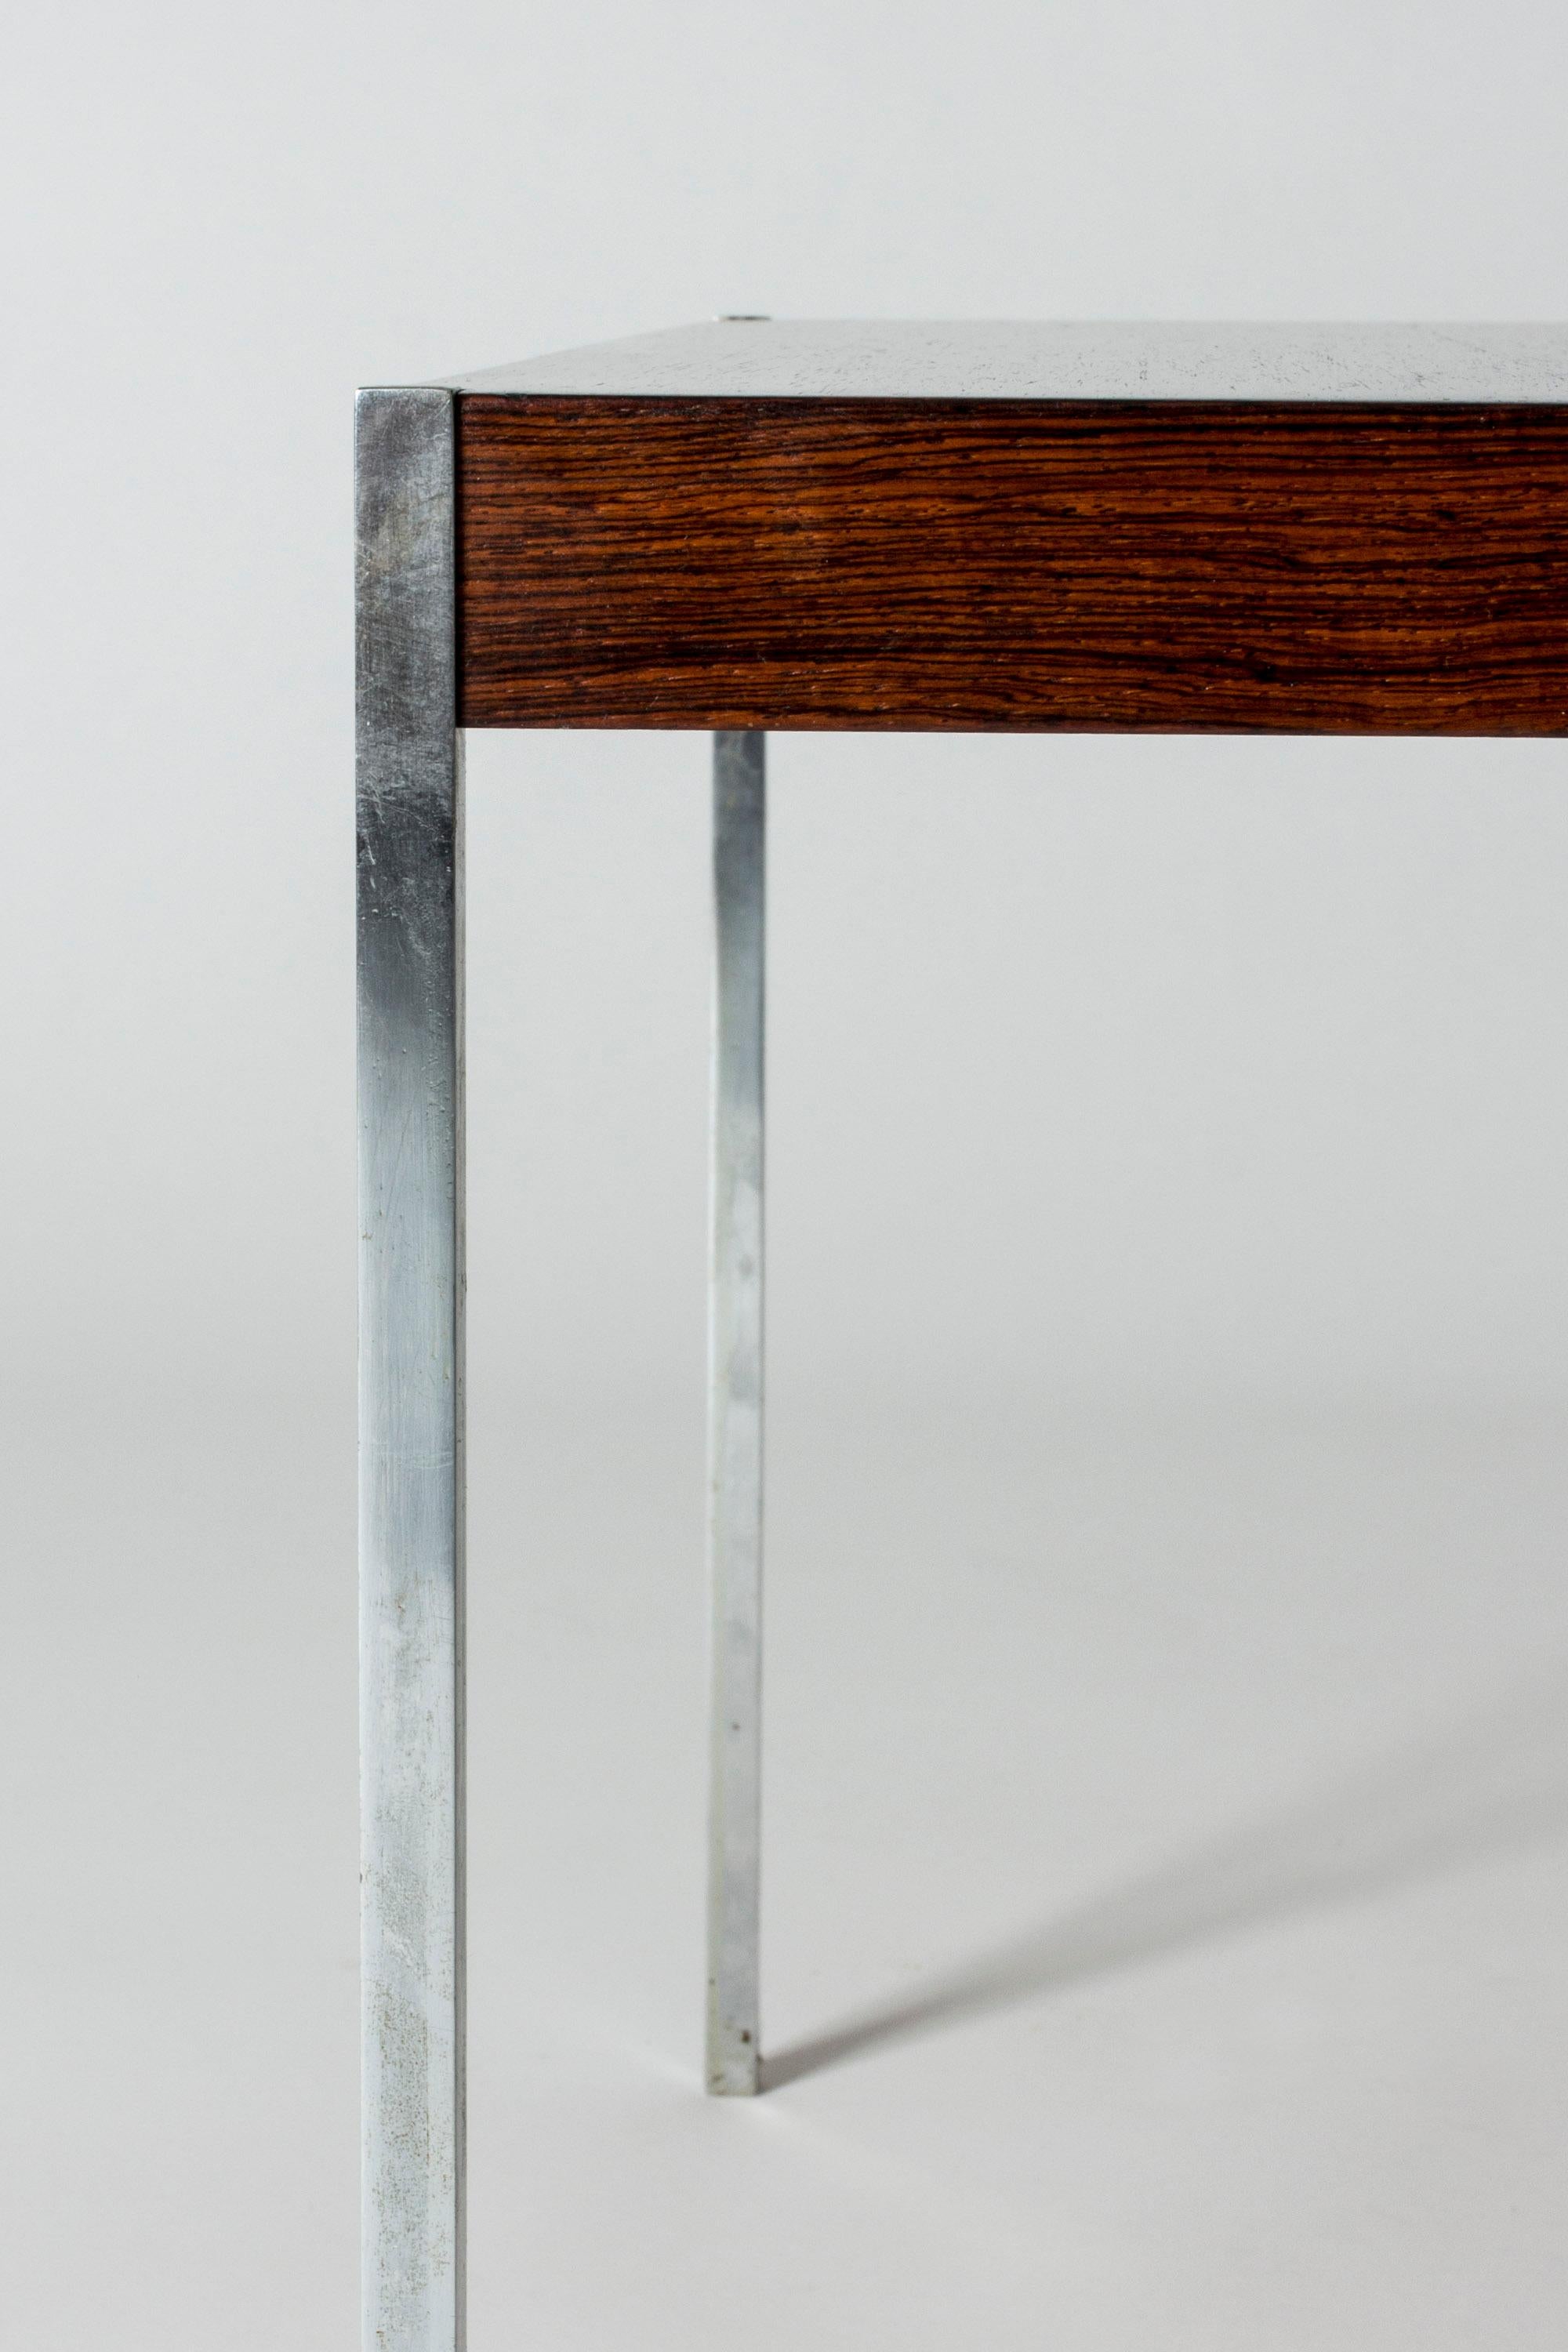 Scandinavian Modern Side Table Designed by Uno and Östen Kristiansson for Luxus, Sweden, 1960s For Sale